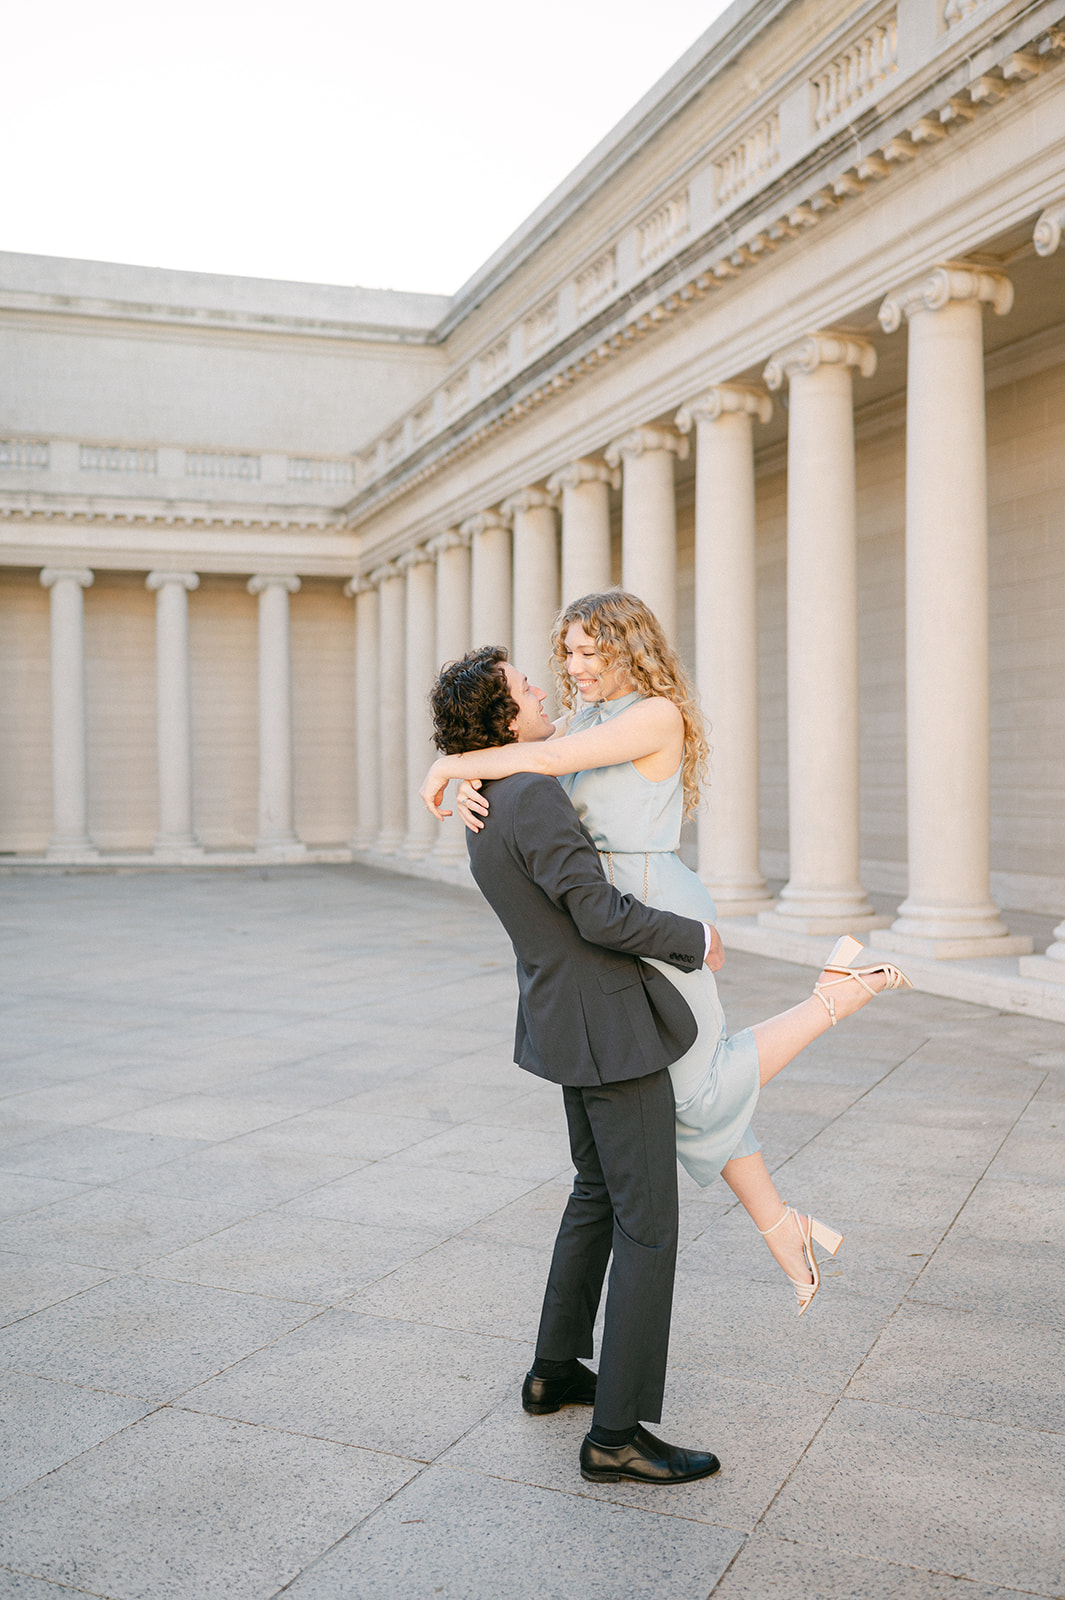 Man lifting up his fiancé at Legion of Honor in San Francisco for their engagement session.